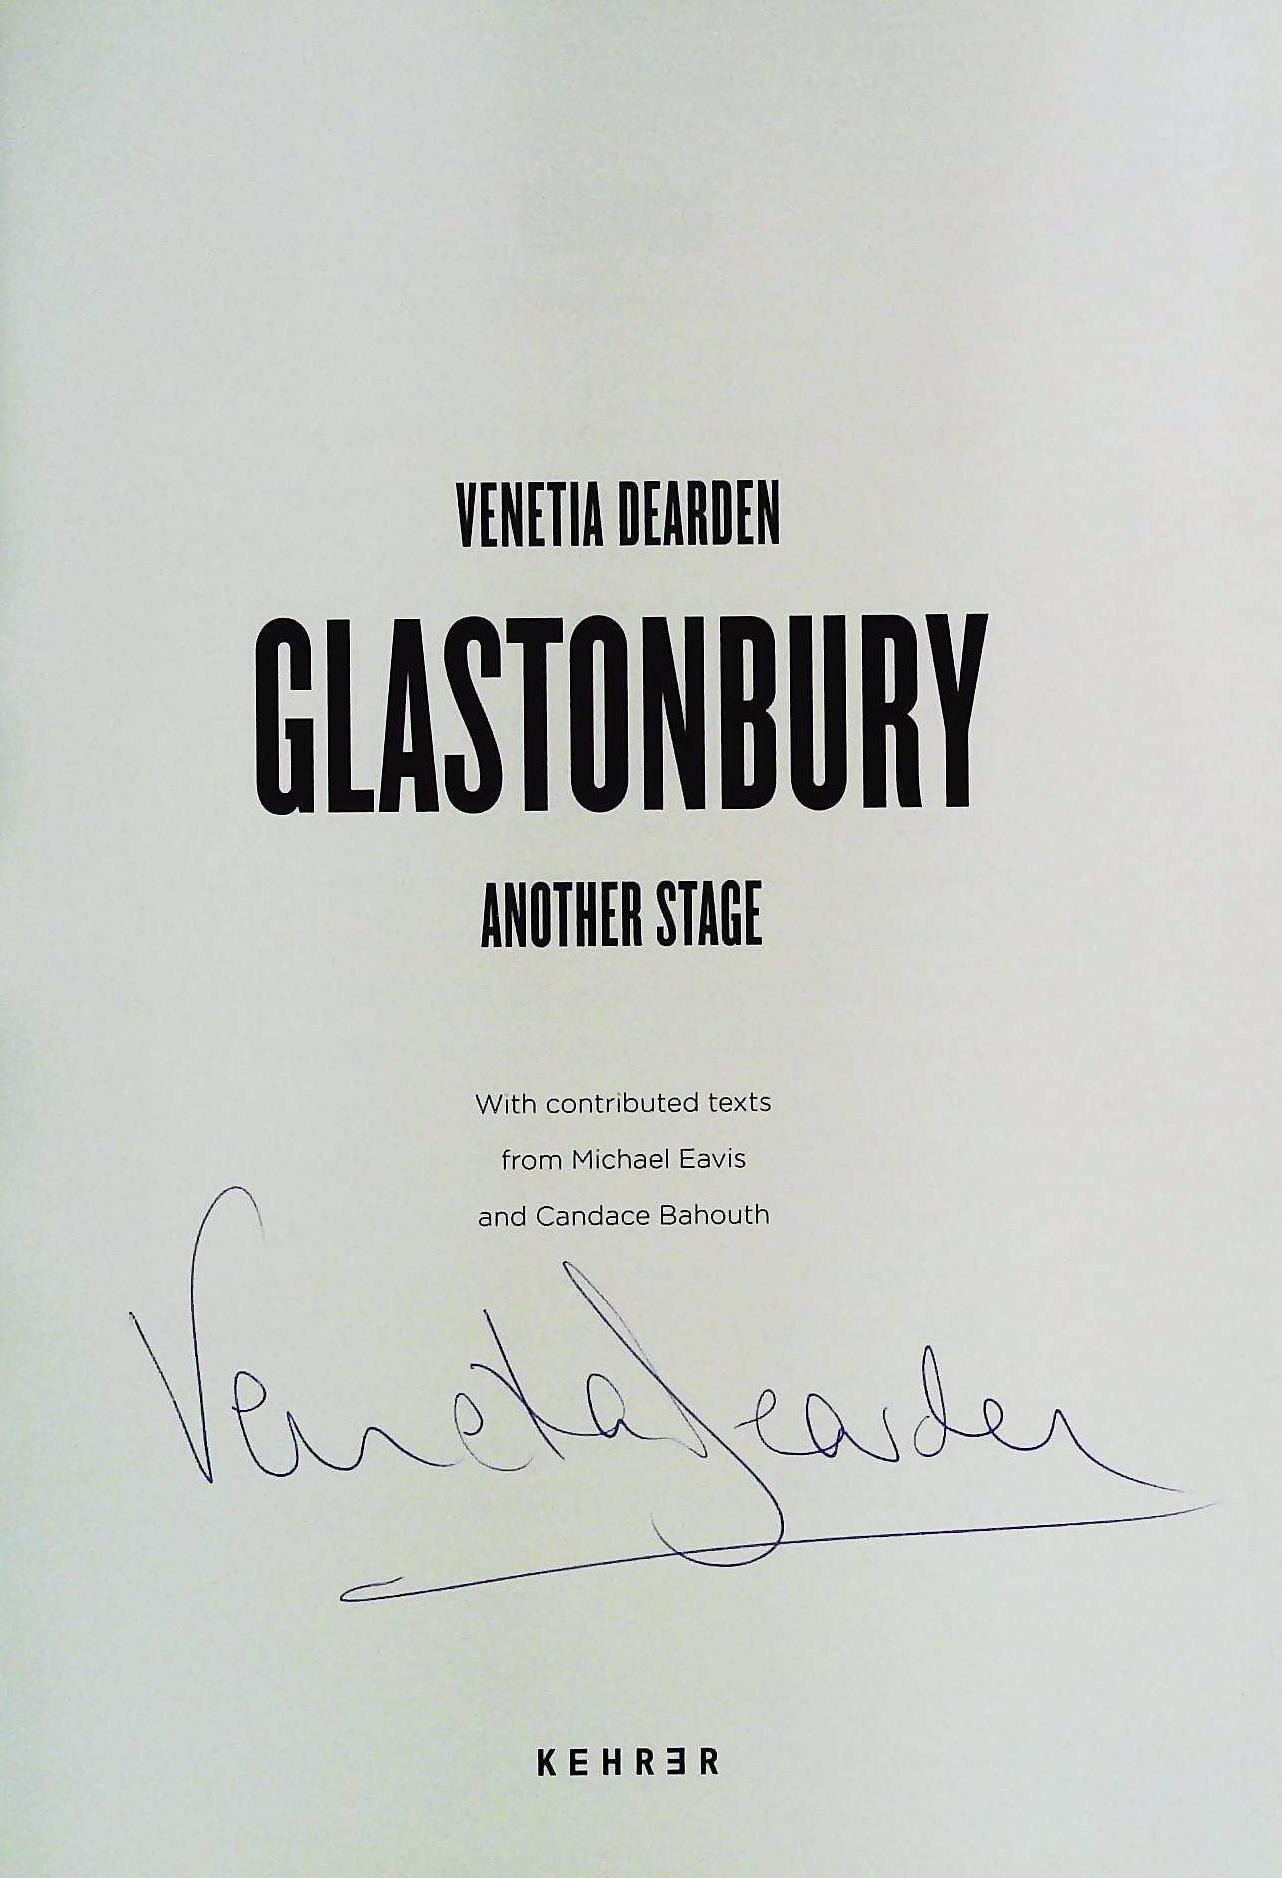 Glastonbury Another Stage by Venetia Dearden hardback book 361 pages signed by author on title - Image 3 of 4